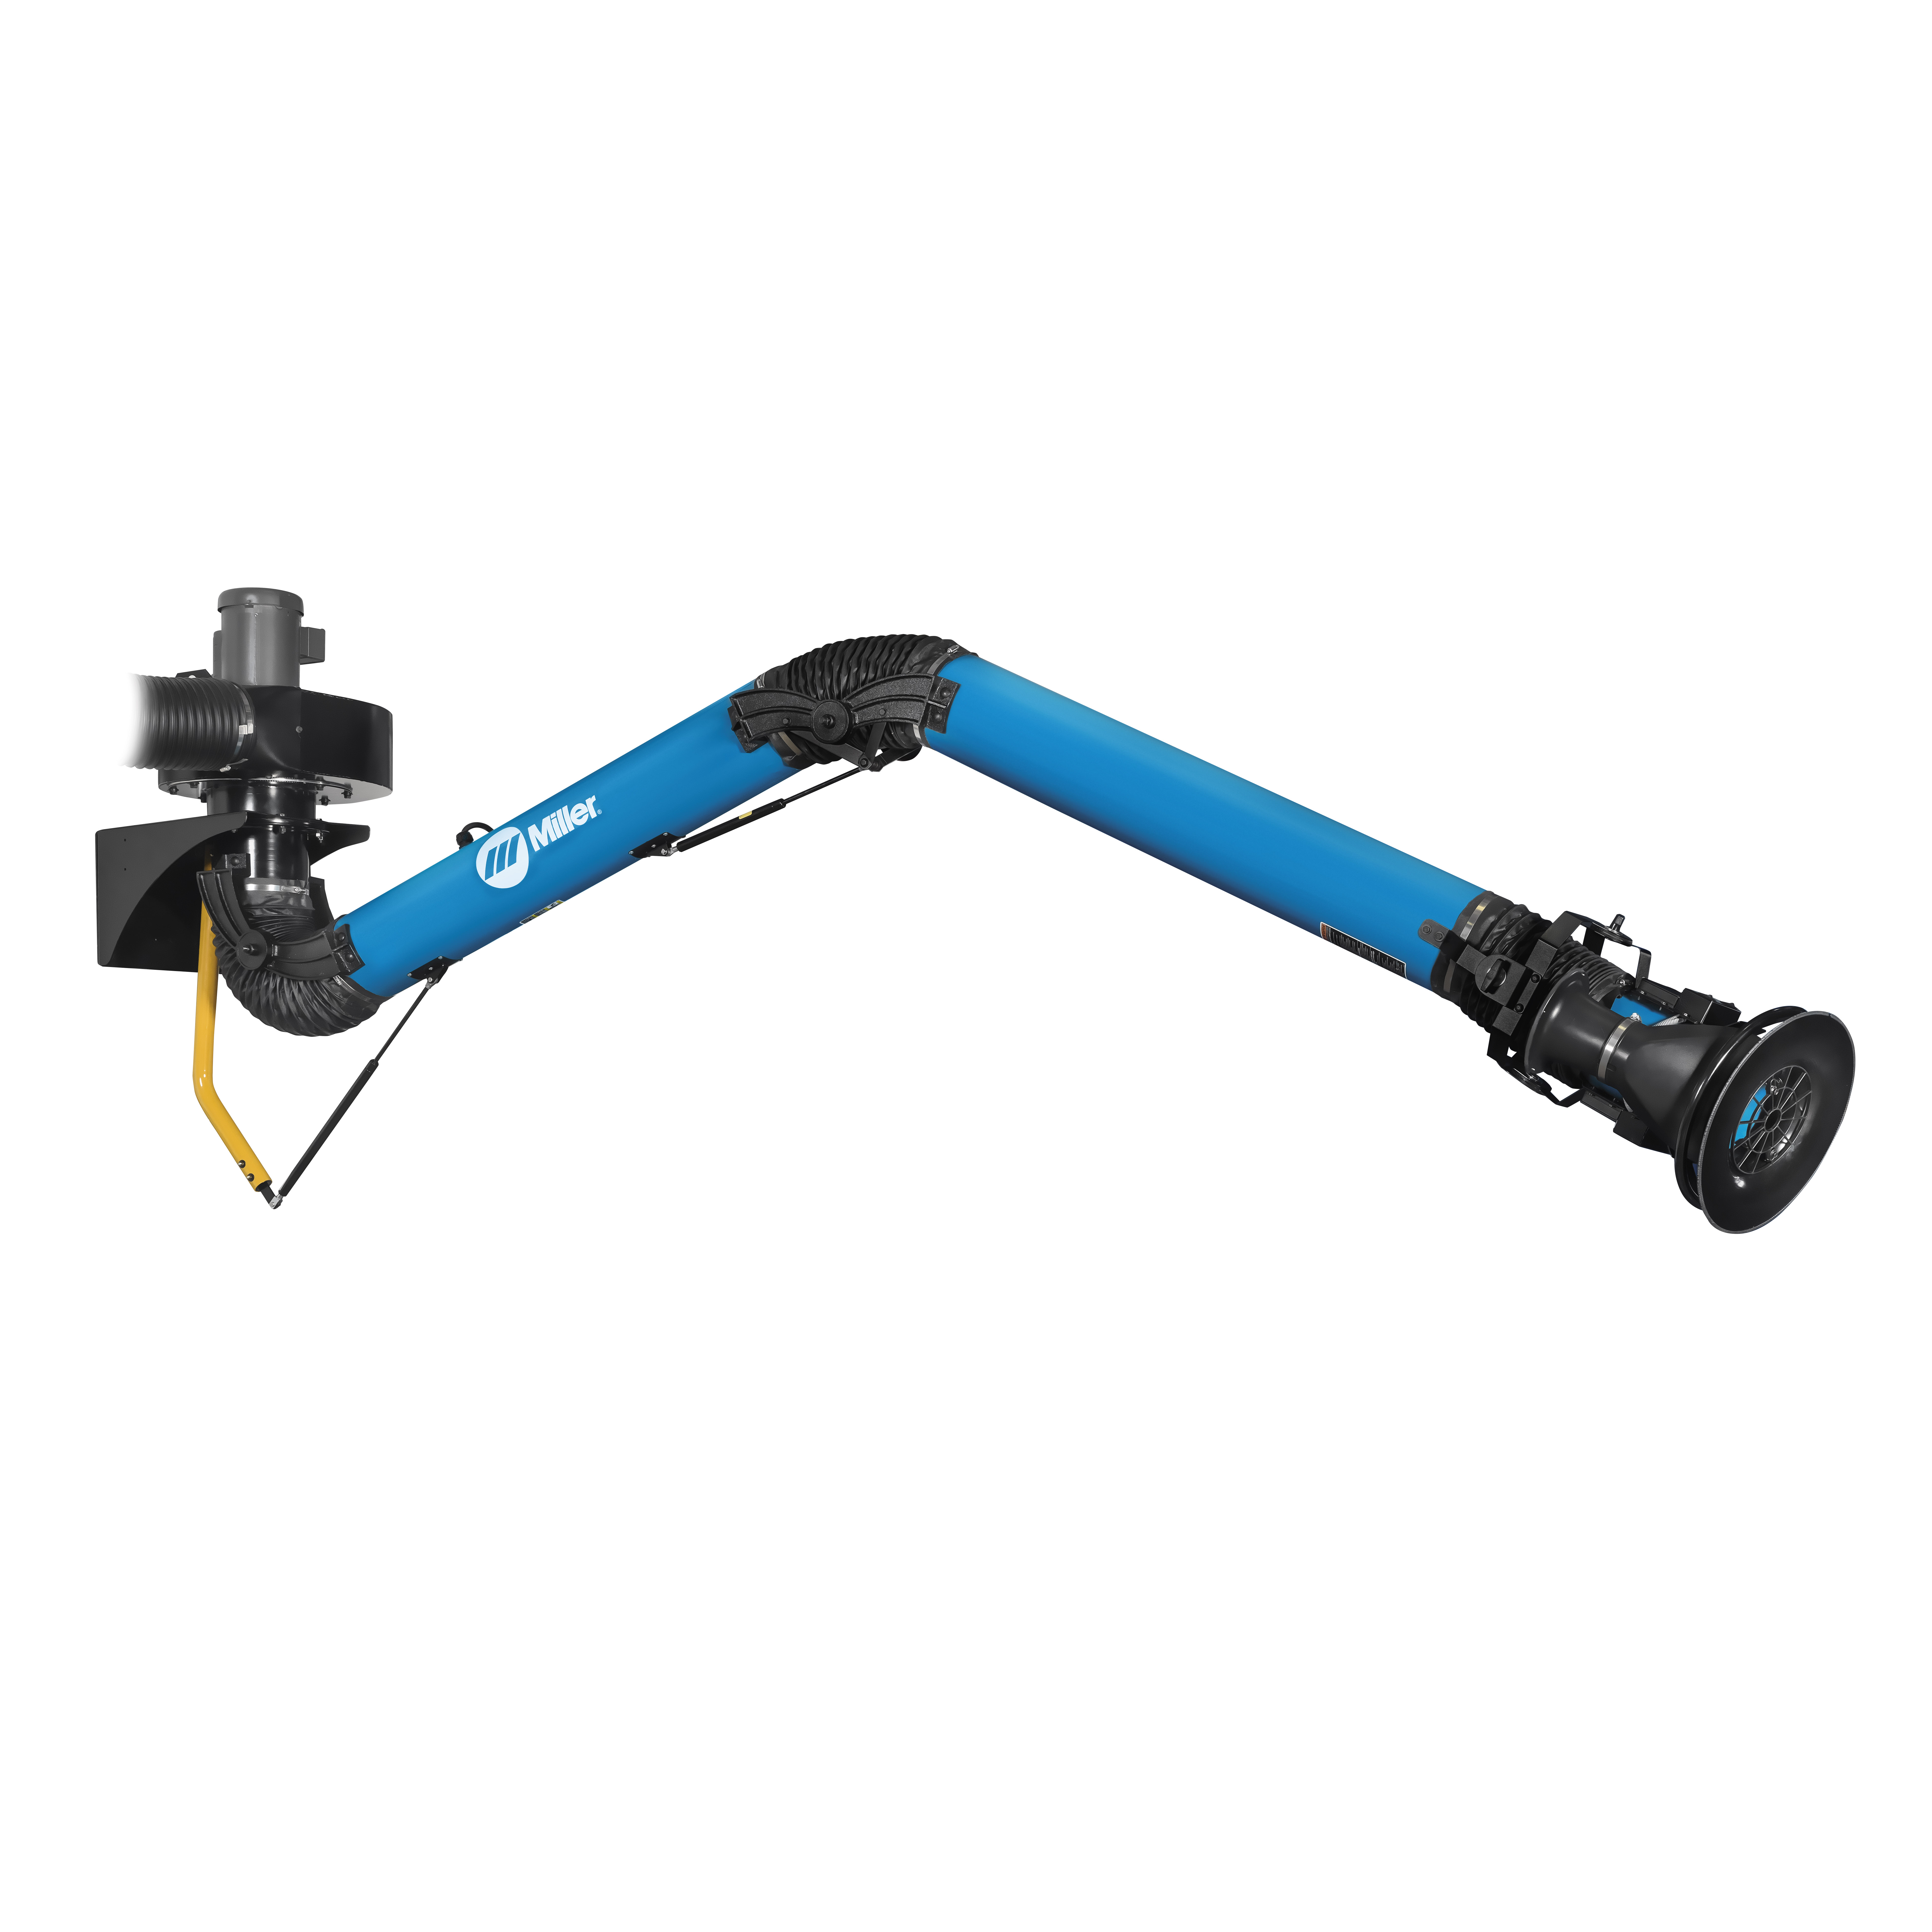 FILTAIR® 6 in. x 10 ft. Standard Fume Extraction Arm | MillerWelds